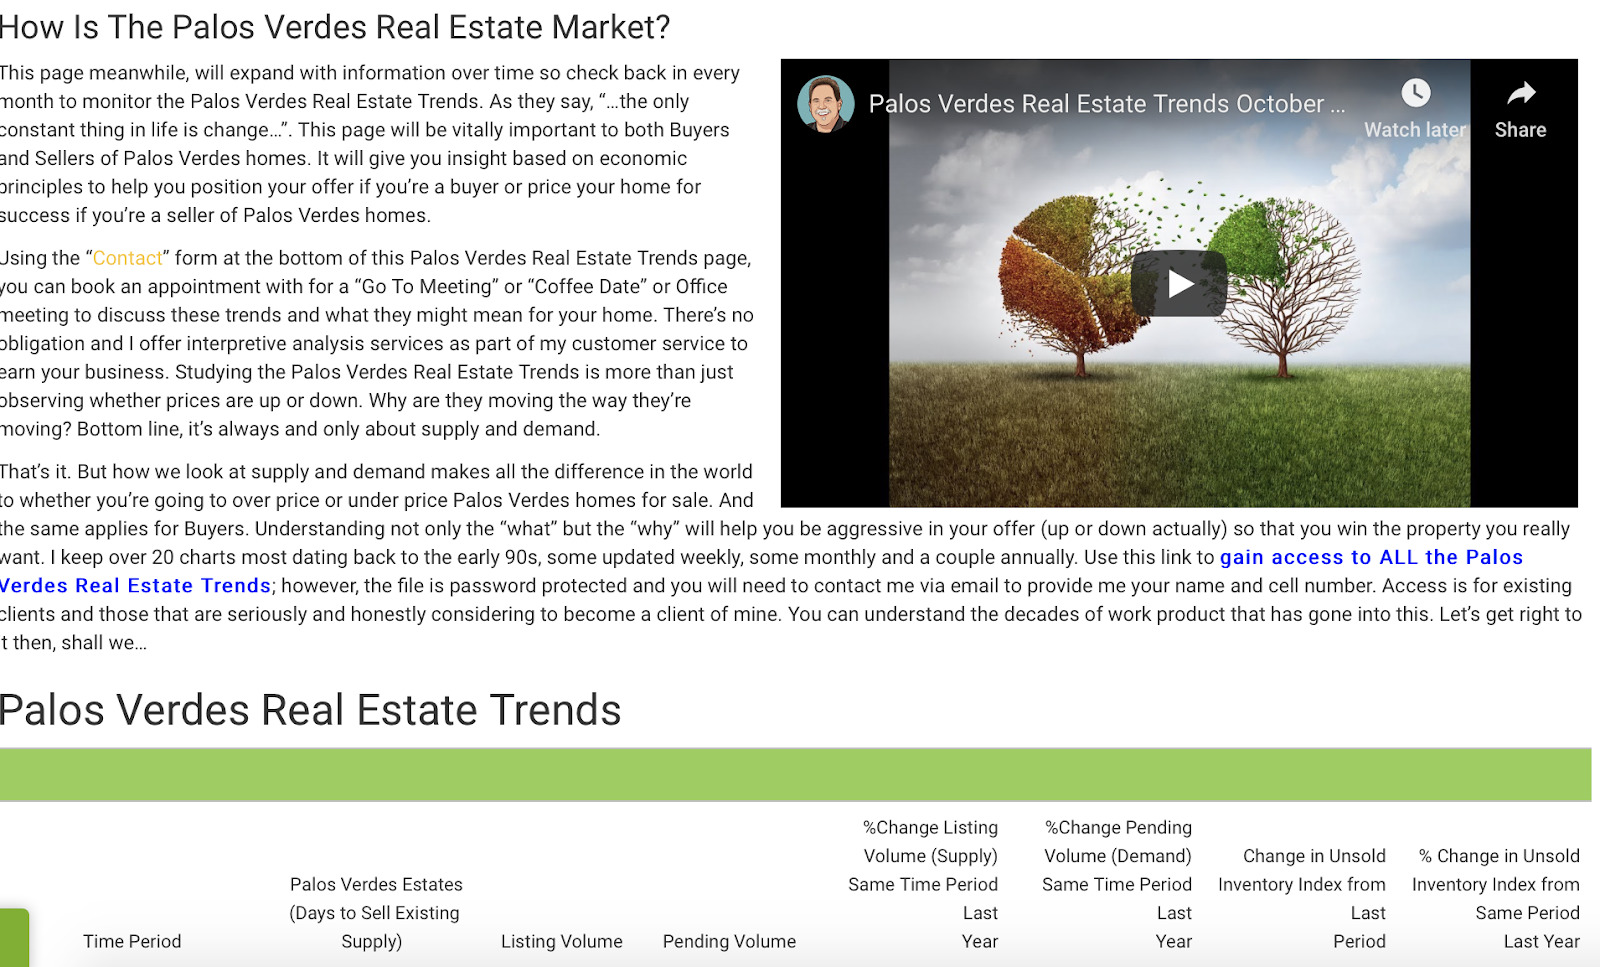 In-depth analysis of Palos Verdes Real Estate Market trends with charts, video content, and a call-to-action for personalized consultancy on a desktop view.